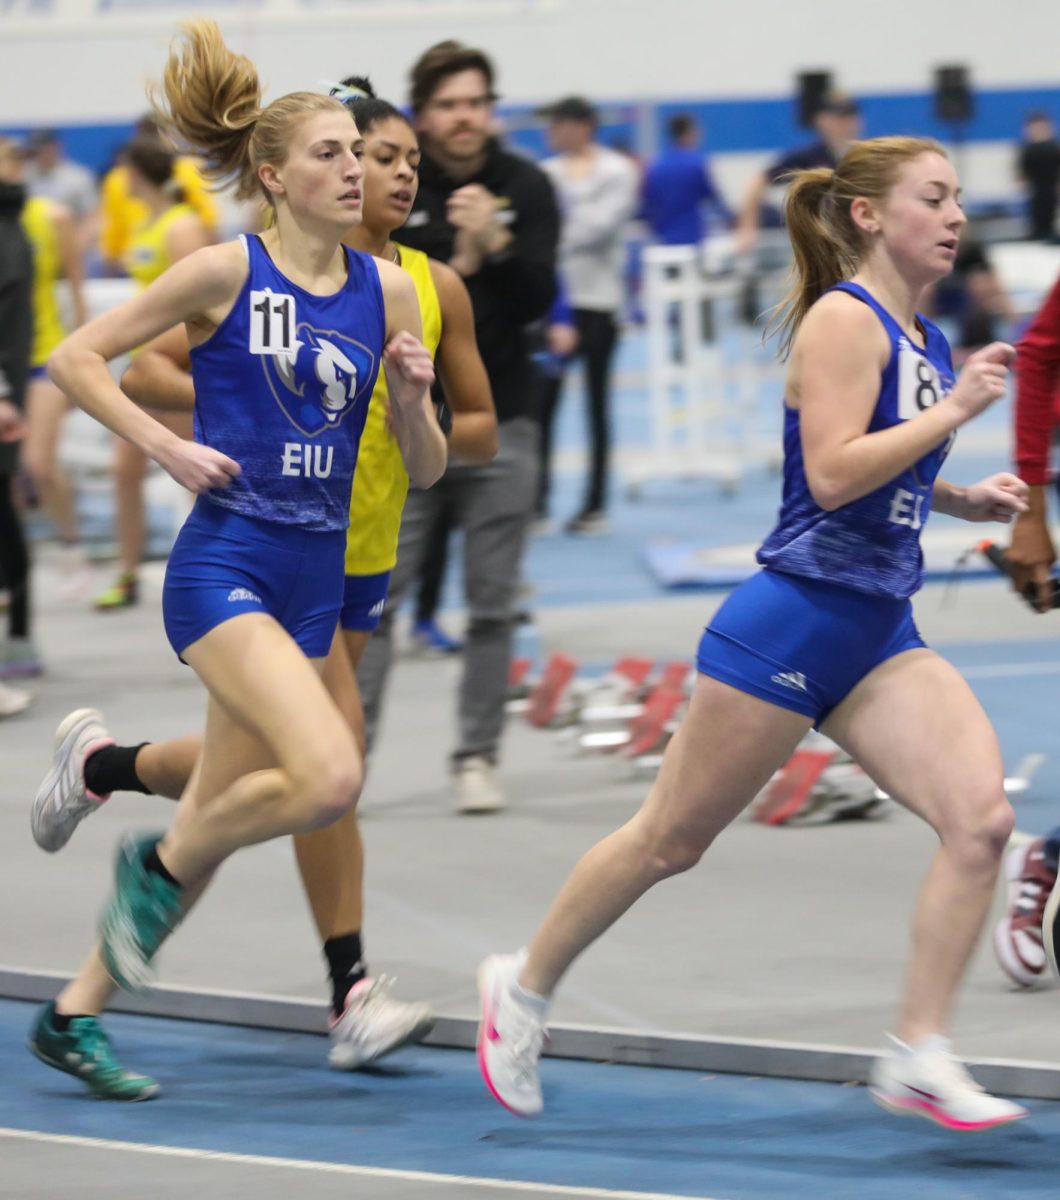 (From Left to Right) Kylie Decker and Rylea Borgic in the mile run at track meet.